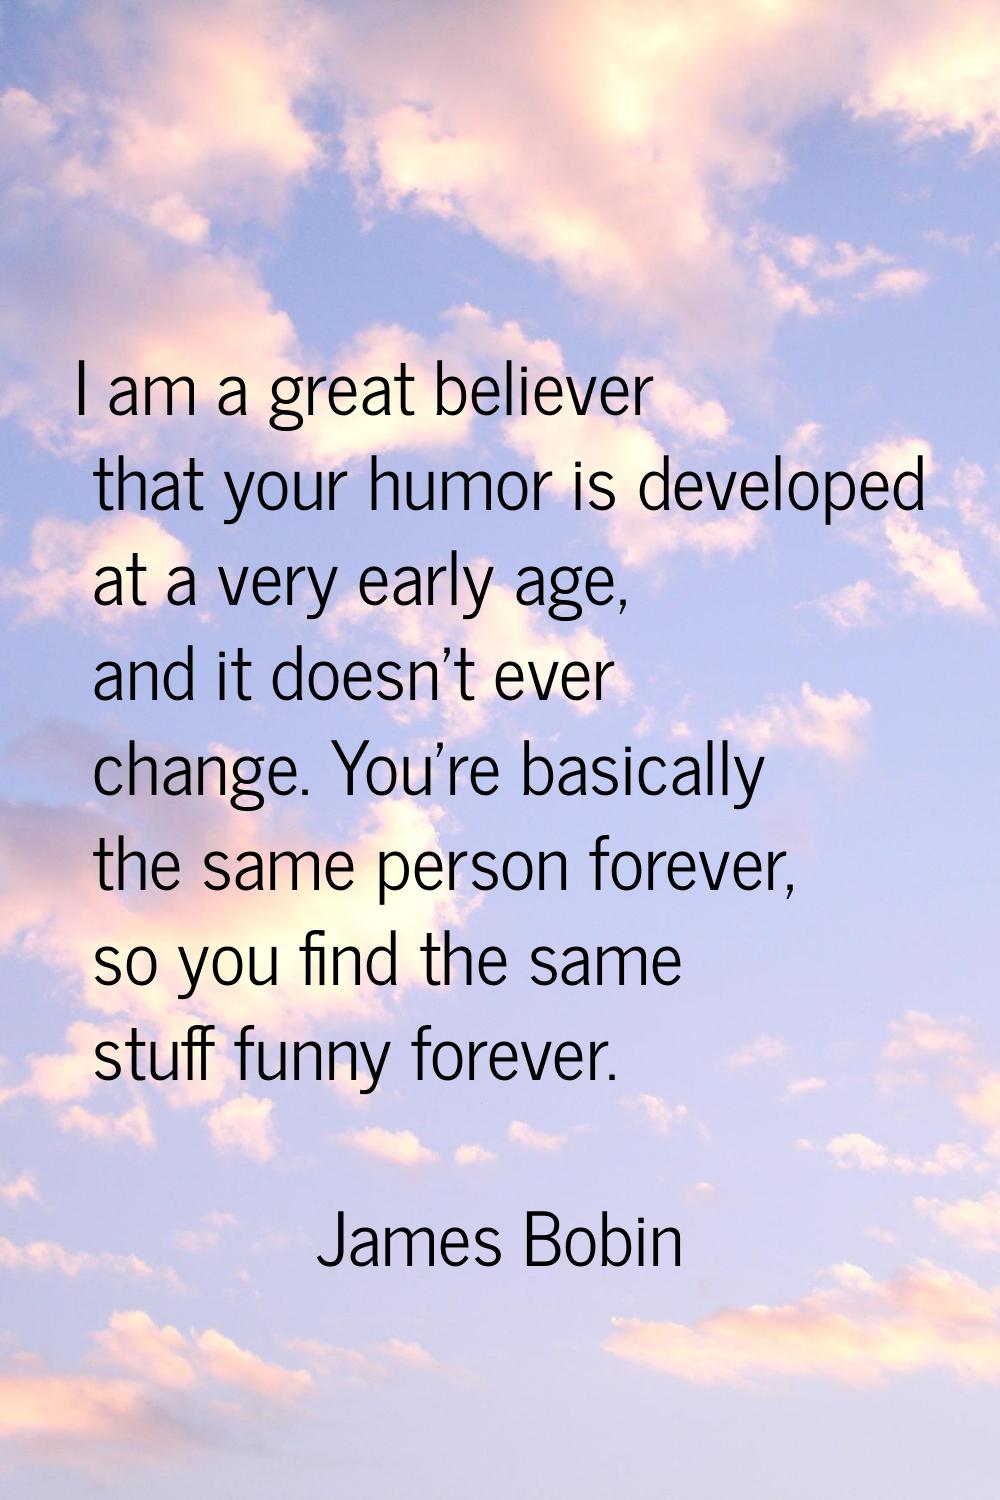 I am a great believer that your humor is developed at a very early age, and it doesn't ever change.